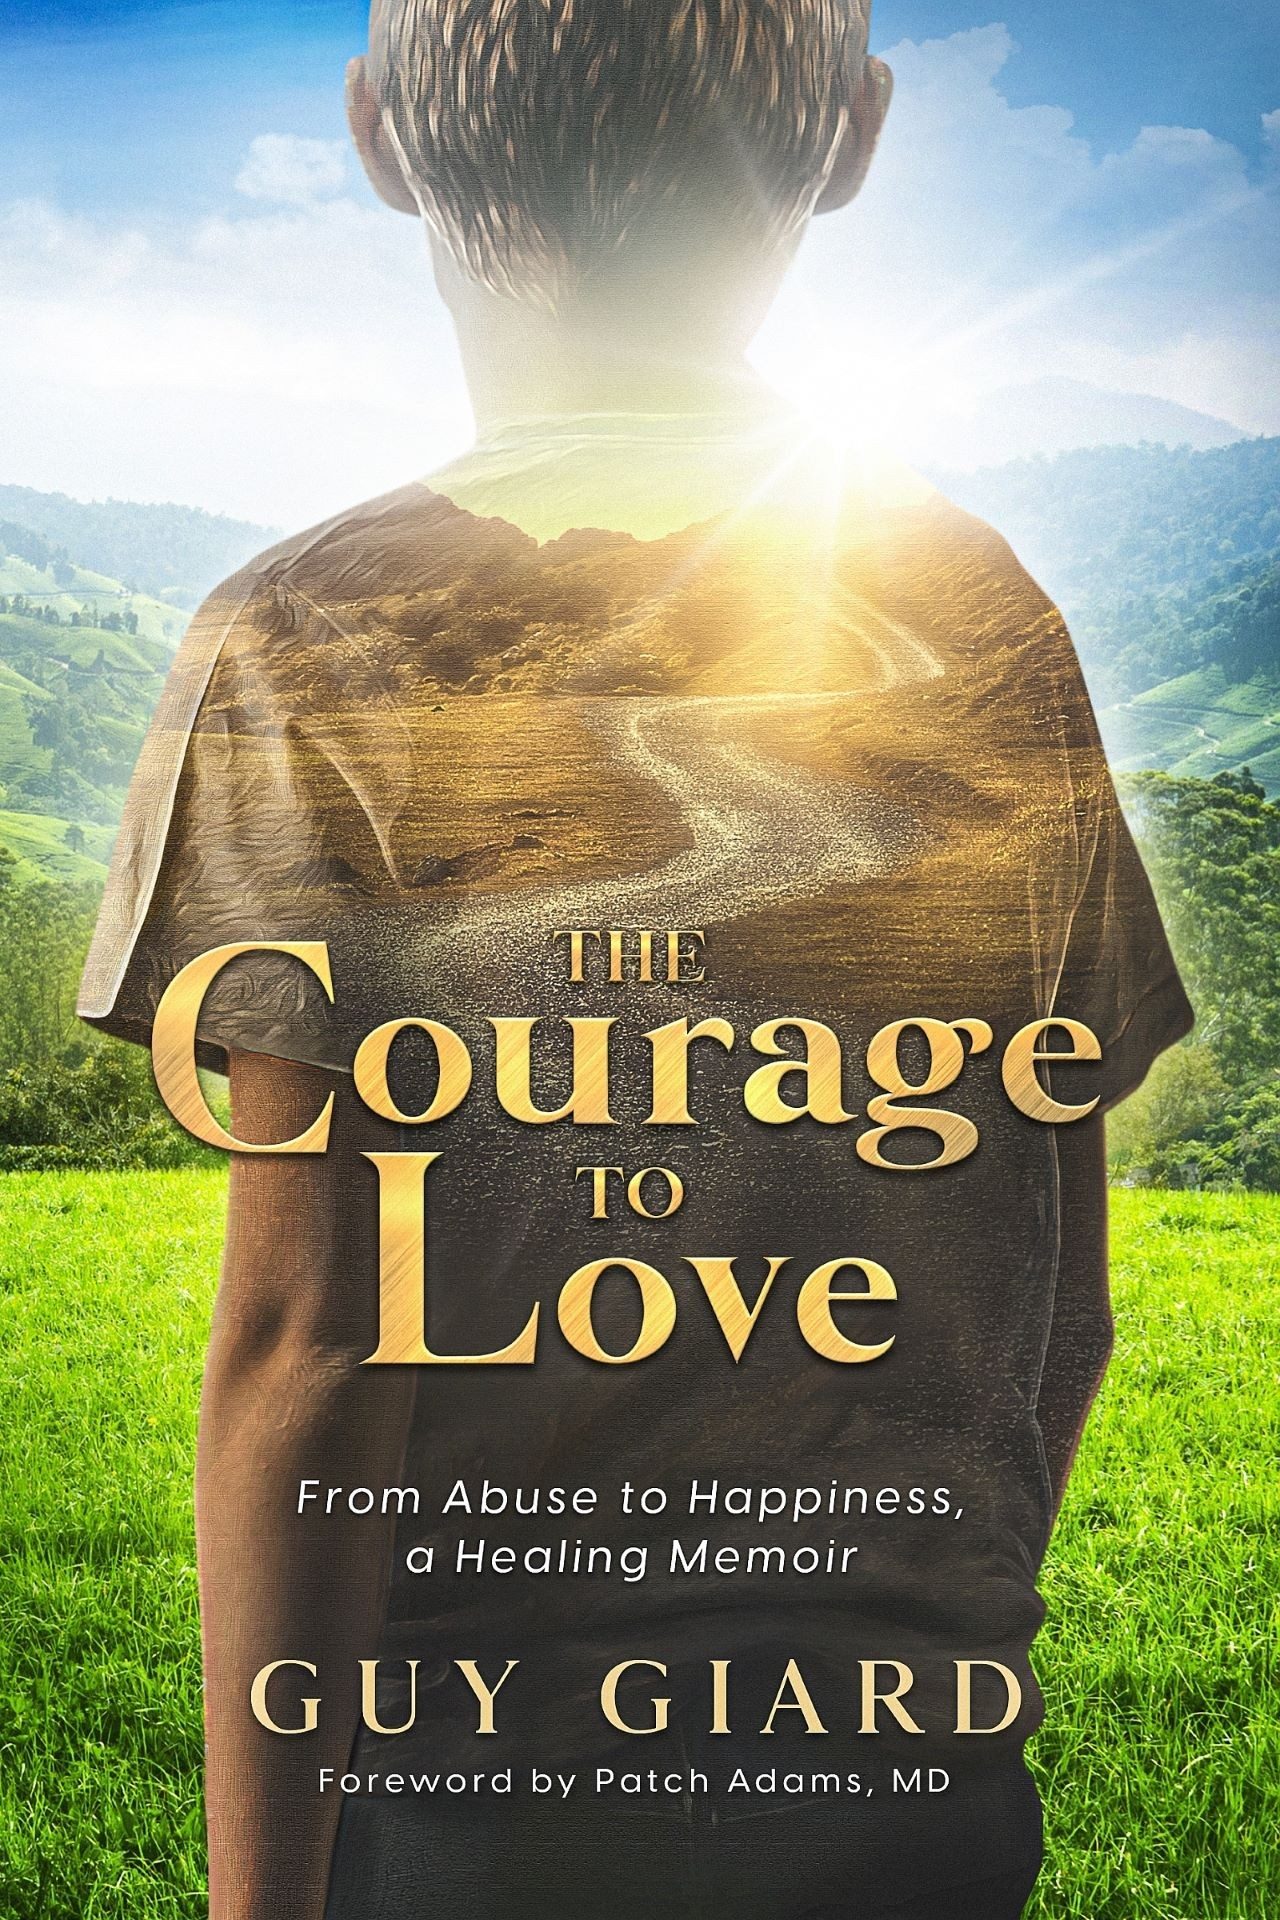 Cover of 'The Courage to Love' by Guy Giard, showing a child overlooking a sunny landscape, symbolizing hope and healing